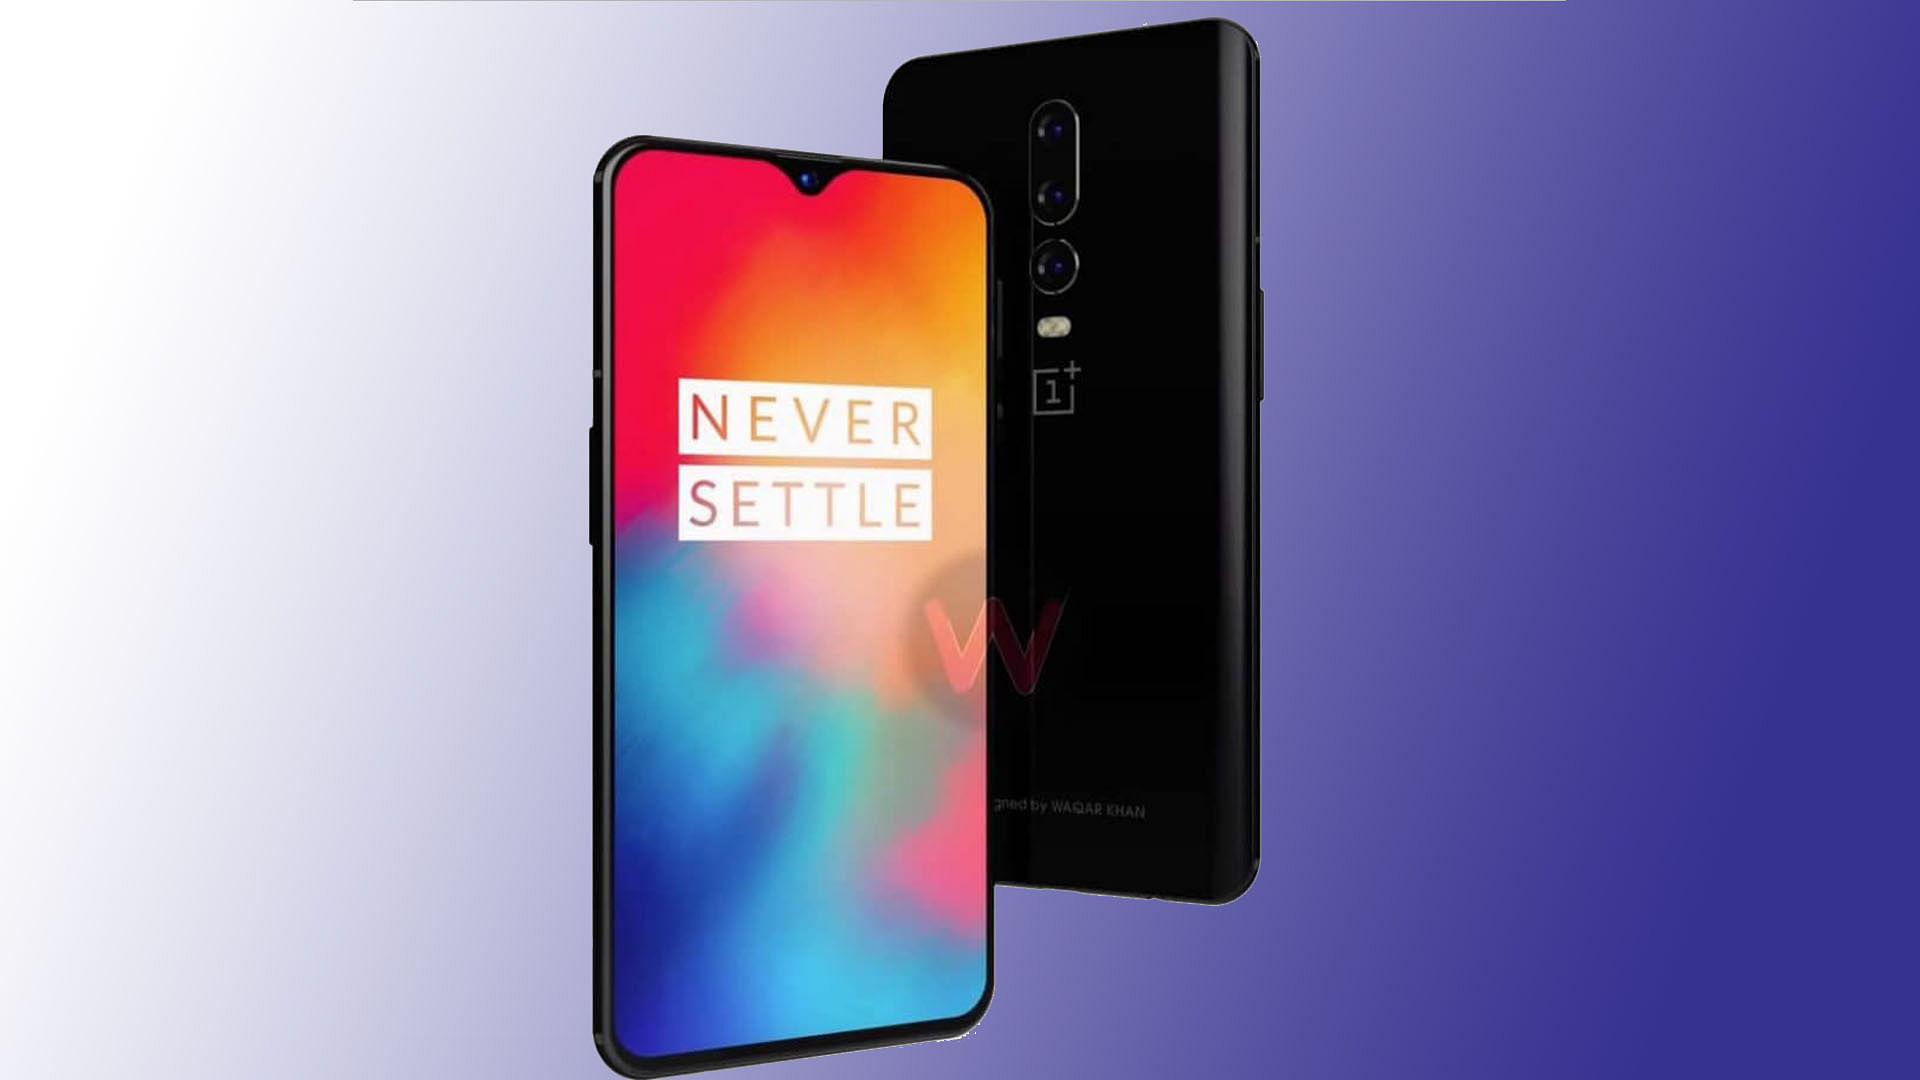 This could be the official OnePlus 6T design